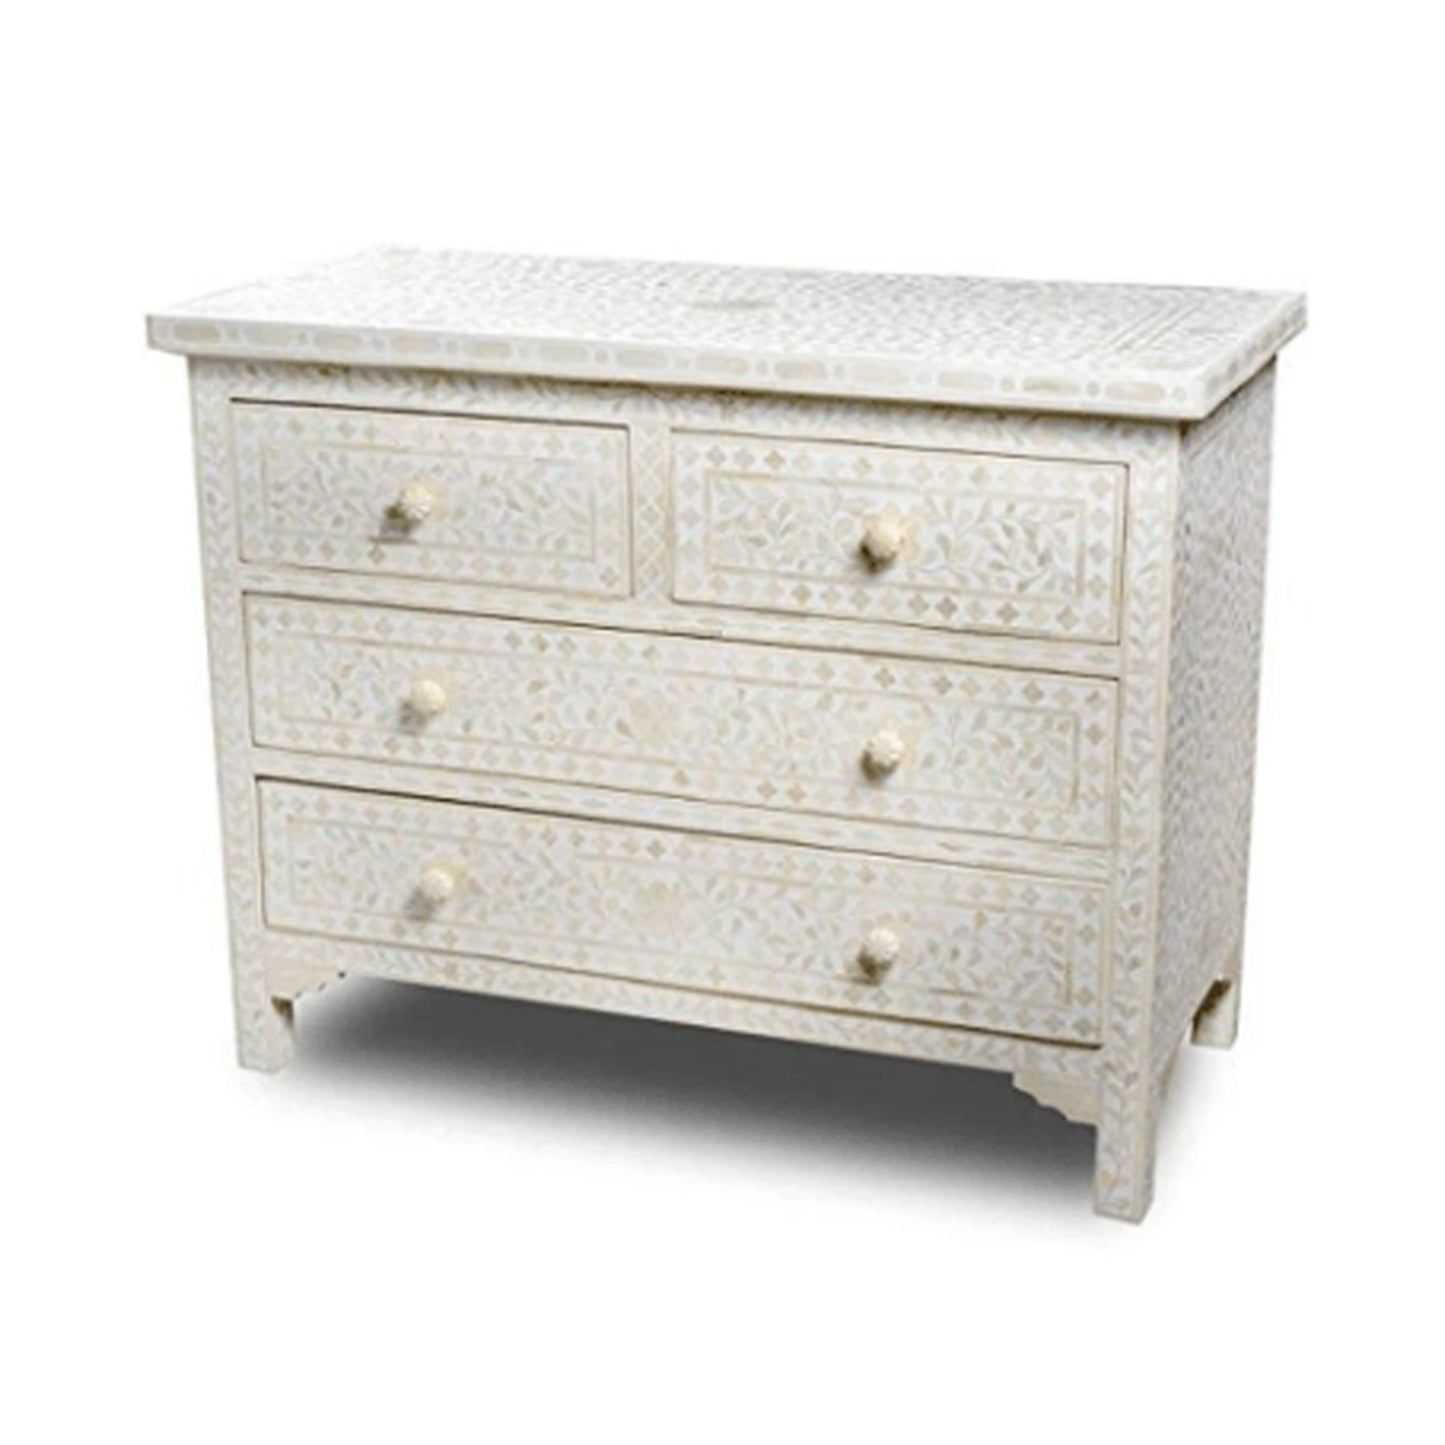 Handmade Bone Inlay Chest Of Drawers With Four Drawer by hpCreations